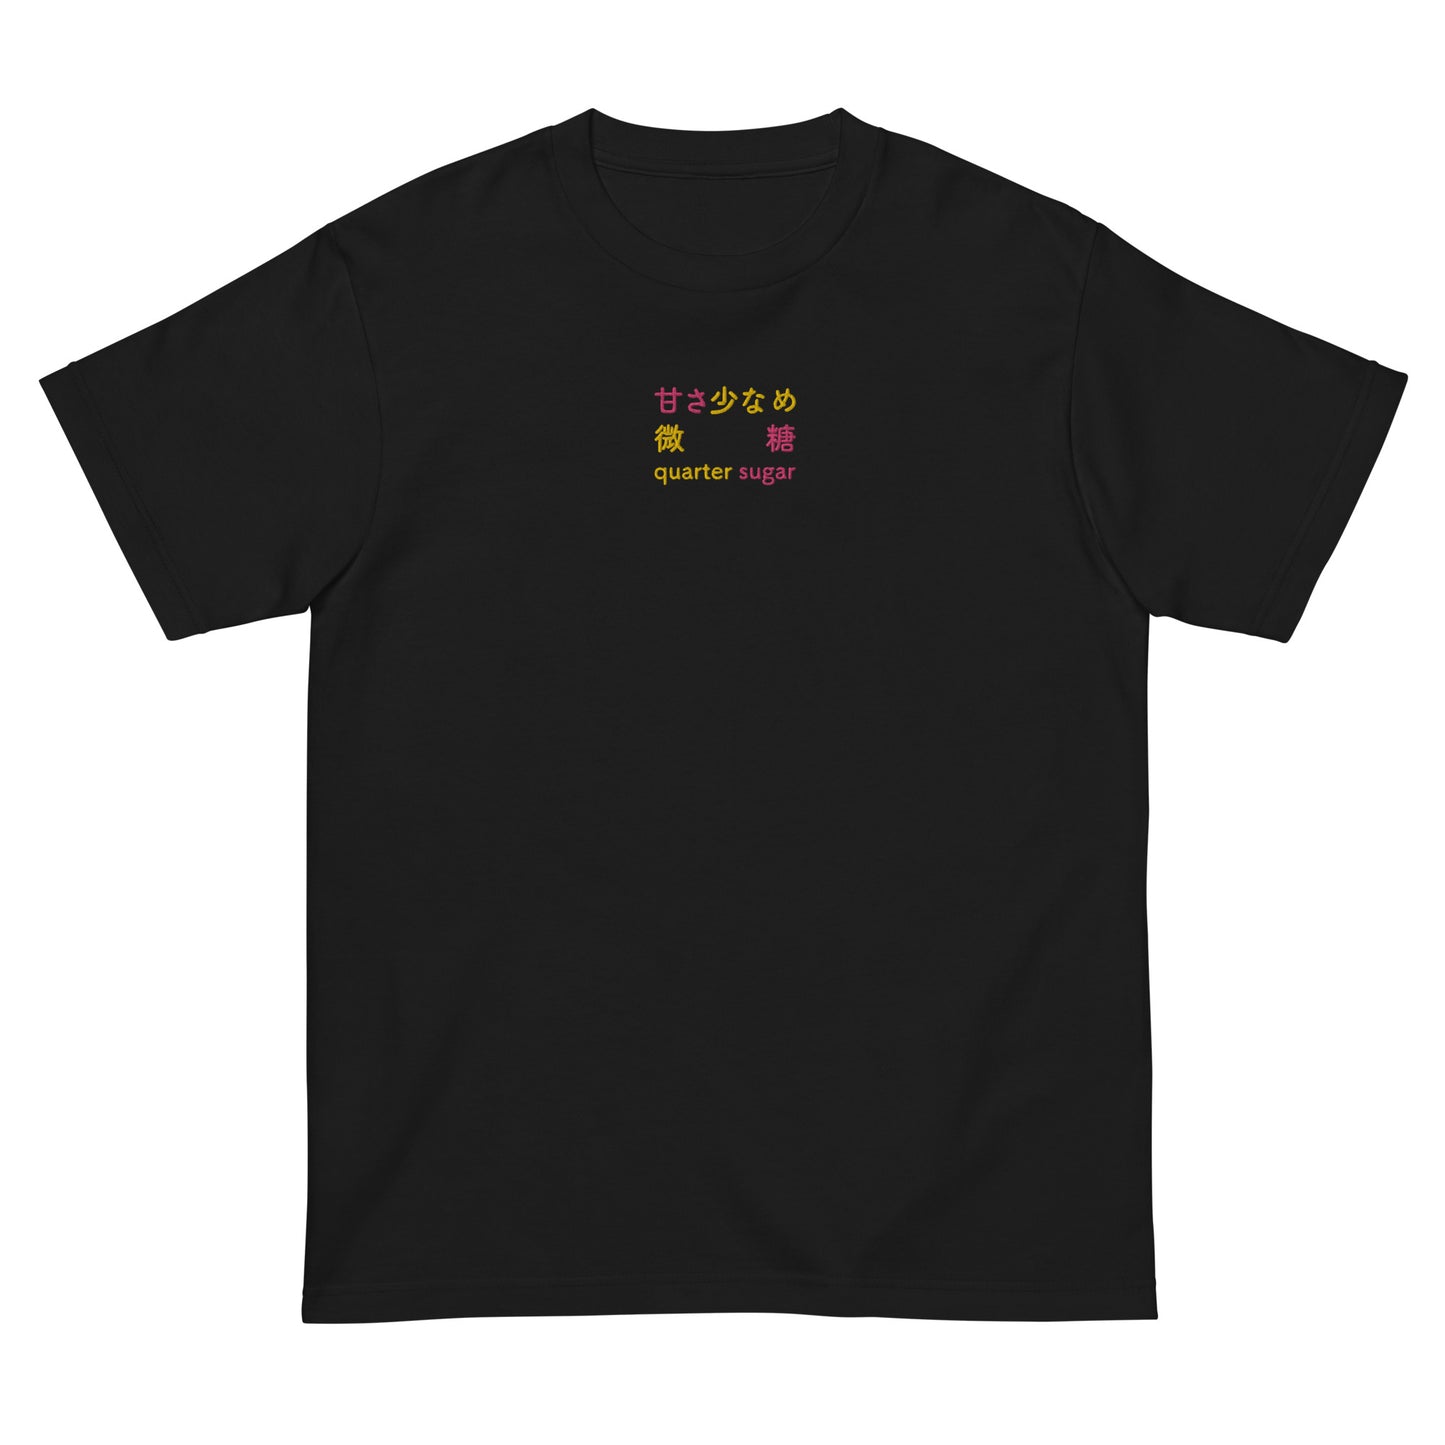 Black High Quality Tee - Front Design with an Yellow, Pink Embroidery "Quarter Sugar" in Japanese,Chinese and English